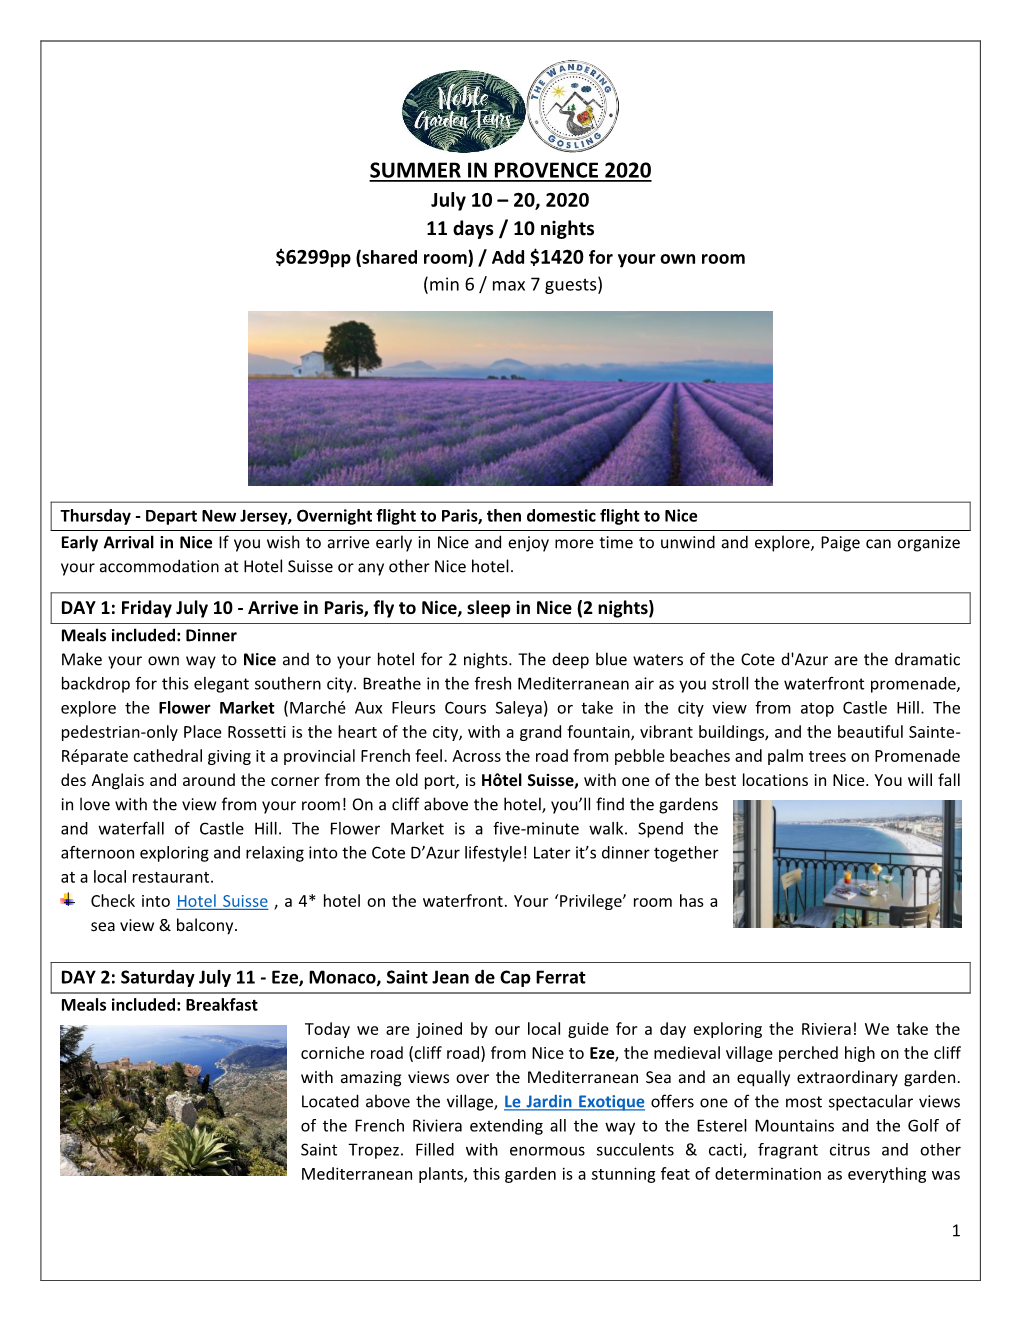 SUMMER in PROVENCE 2020 July 10 – 20, 2020 11 Days / 10 Nights $6299Pp (Shared Room) / Add $1420 for Your Own Room (Min 6 / Max 7 Guests)